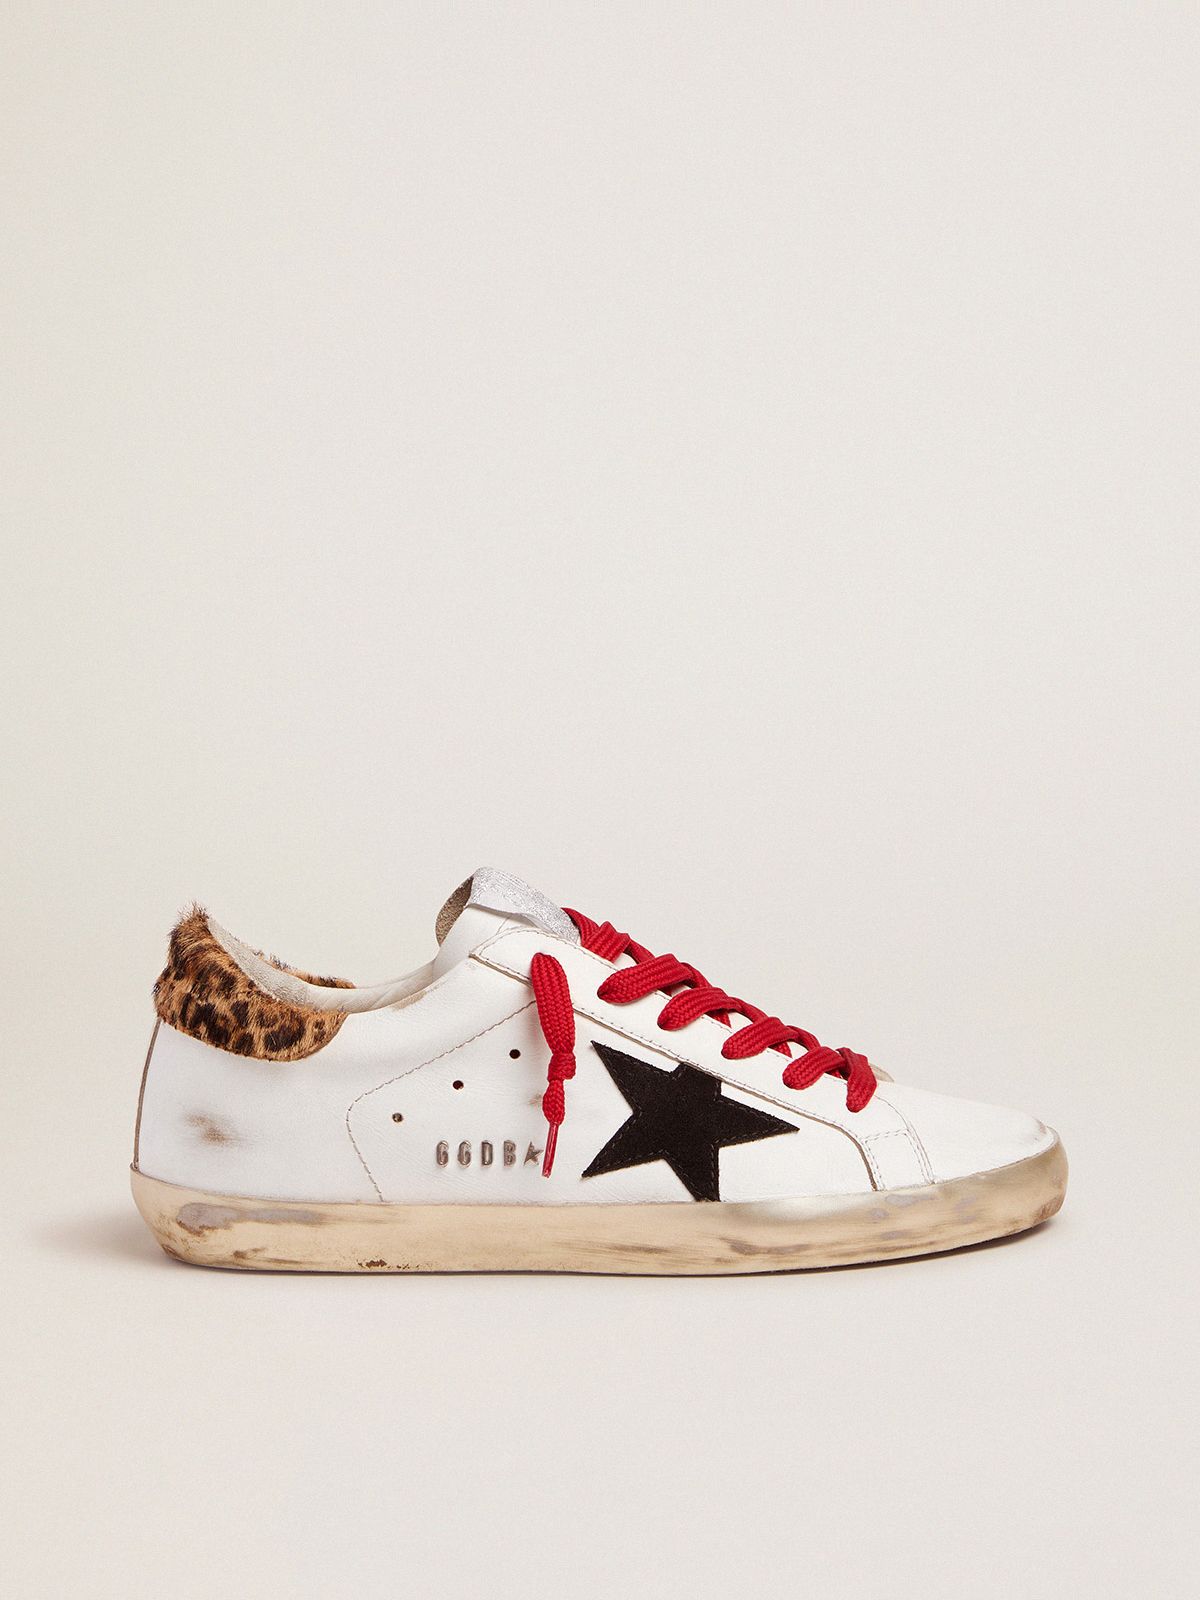 Sneakers Uomo Golden Goose Super-Star sneakers with leopard-print heel tab and red laces